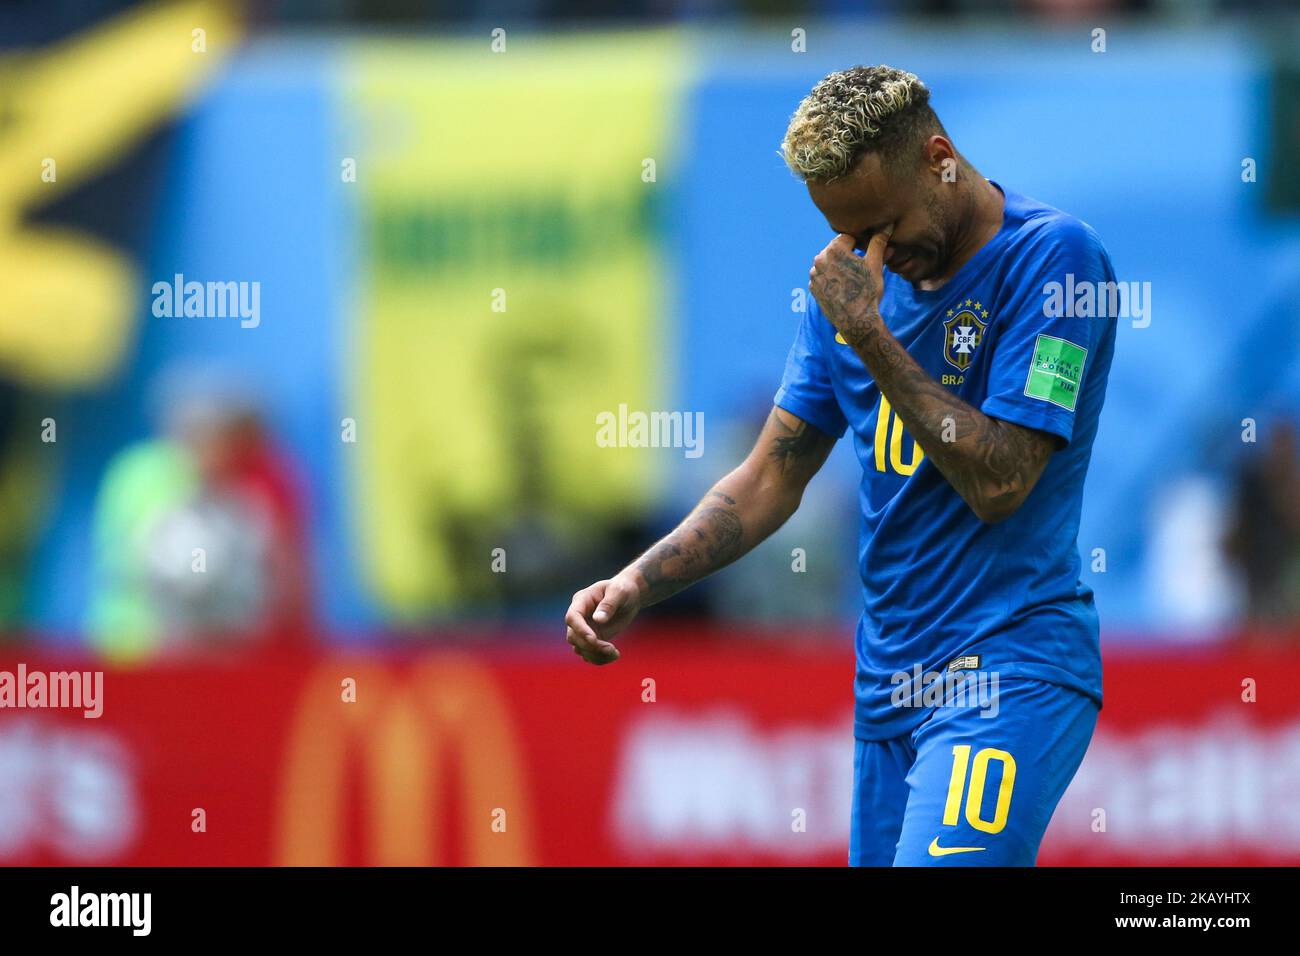 Neymar of the Brazil national football team reacts after scoring a goal during the 2018 FIFA World Cup match, first stage - Group E between Brazil and Costa Rica at Saint Petersburg Stadium on June 22, 2018 in St. Petersburg, Russia. (Photo by Igor Russak/NurPhoto) Stock Photo